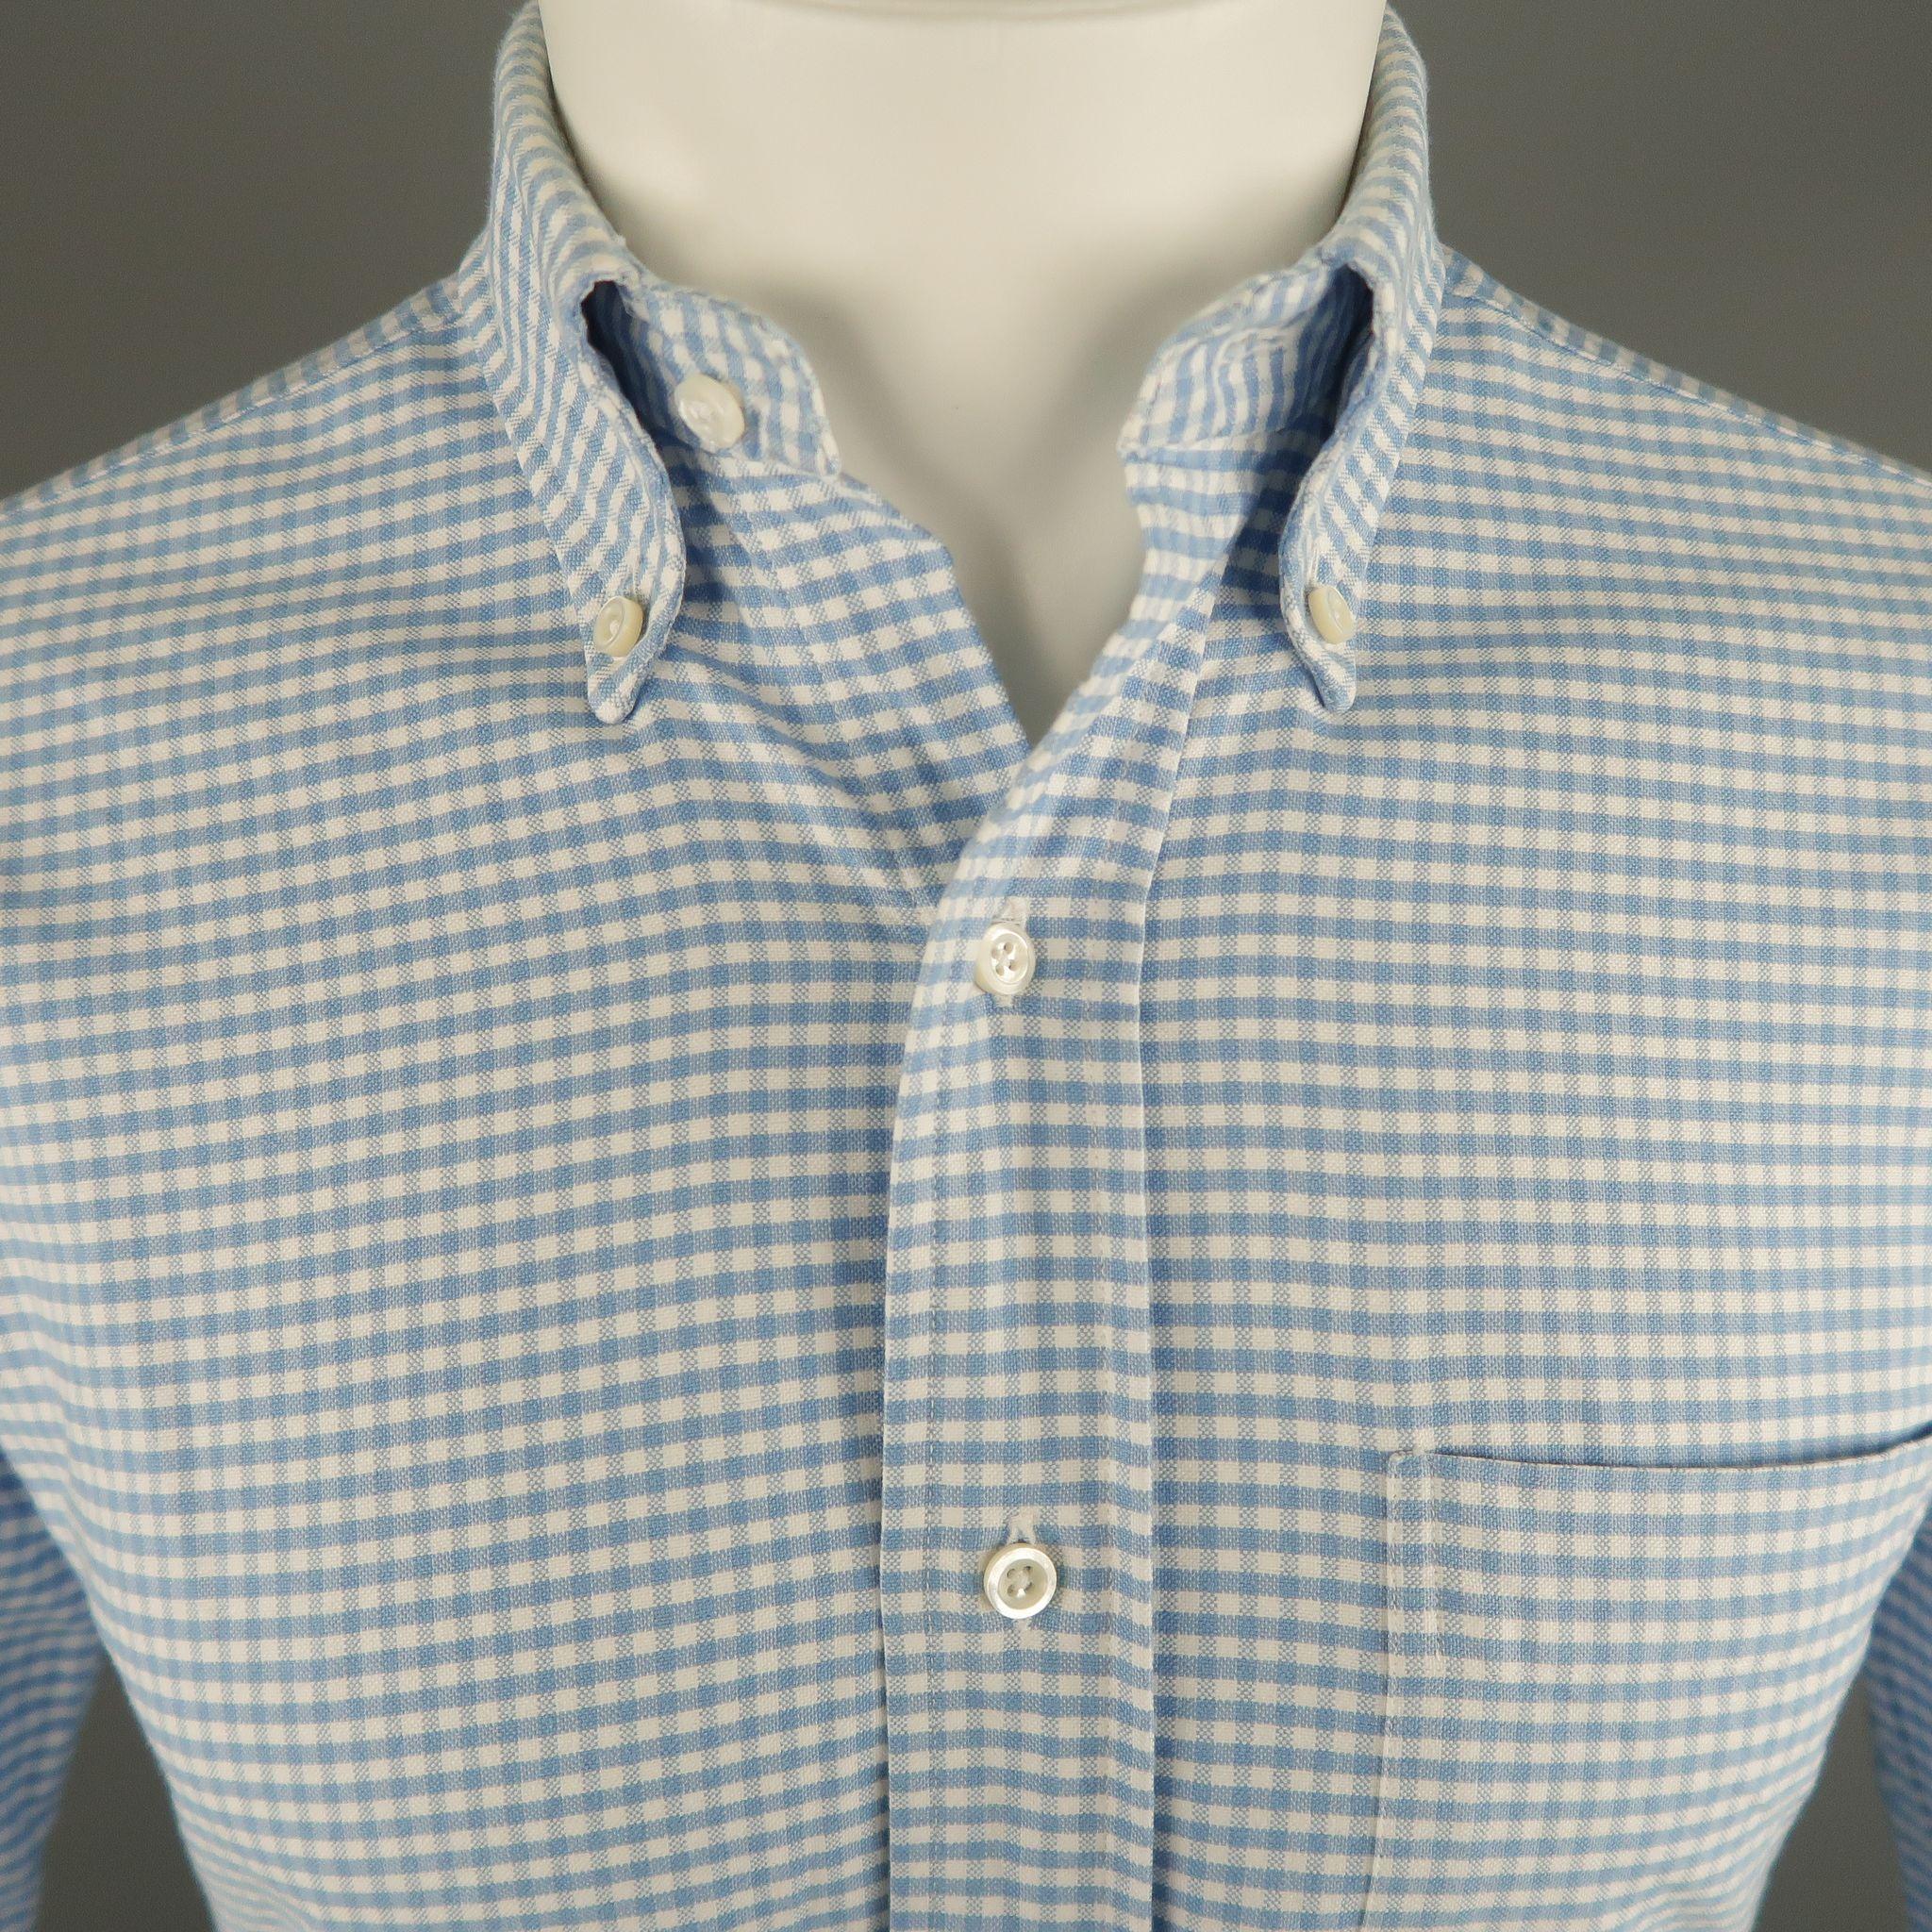 THOM BROWNE Long Sleeve Shirt comes in blue and white tones in a plaid cotton material, button down, with a front patch pocket and buttoned cuffs. Minor Wear at inner collar. Made in USA.

Excellent Pre-Owned Condition.
Marked: 1
 
Measurements:
